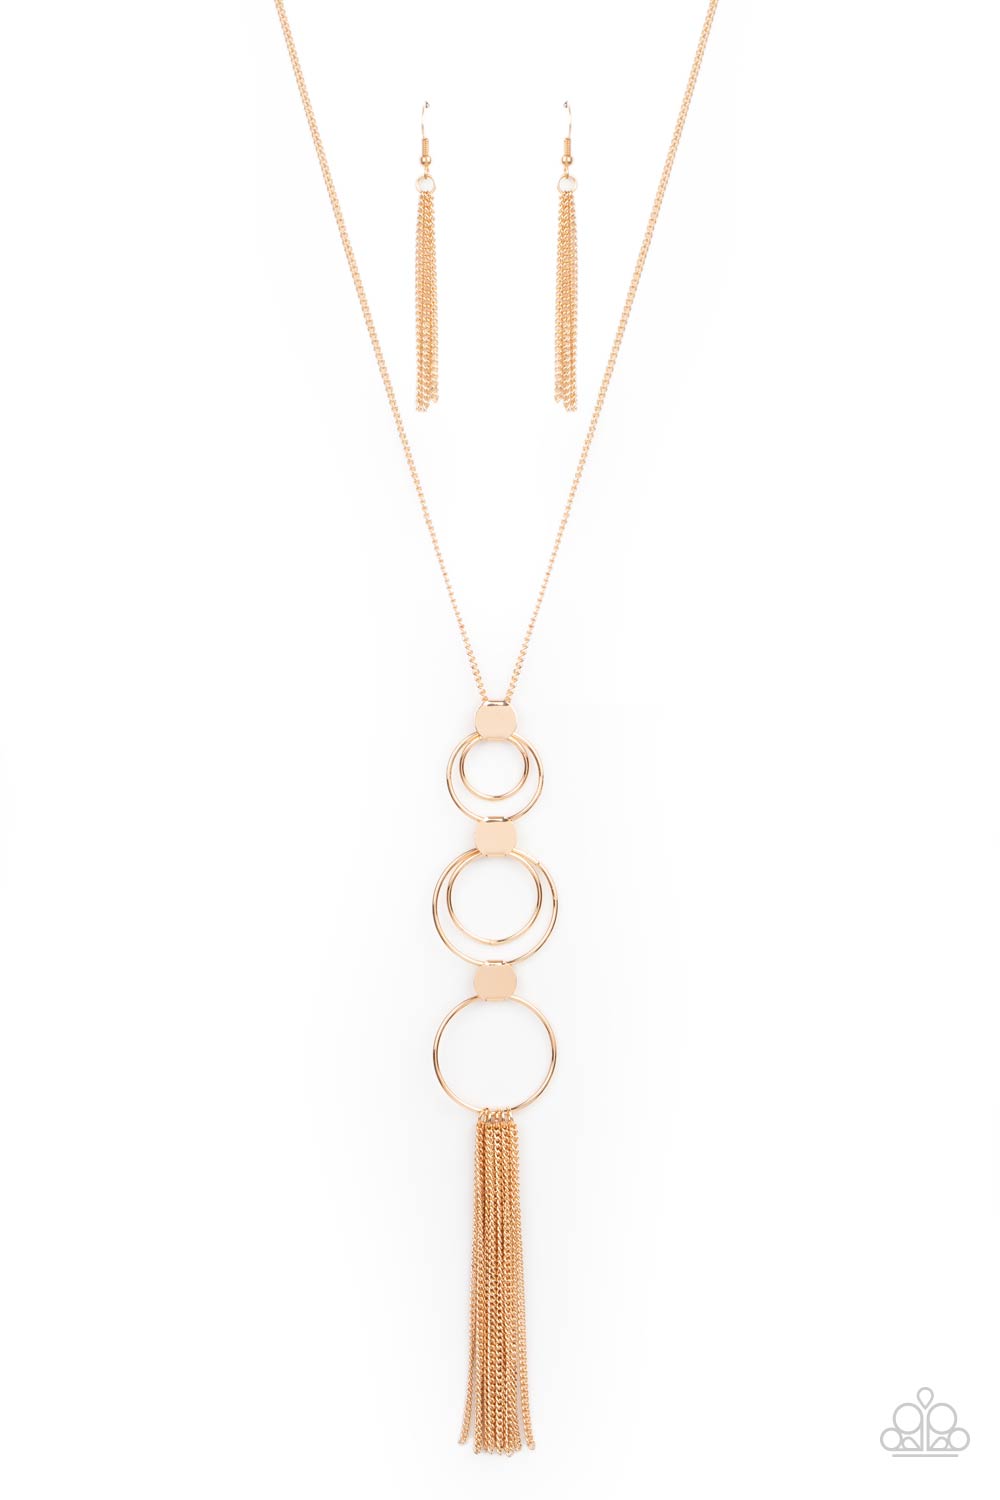 Join The Circle Paparazzi Accessories Necklace with Earrings